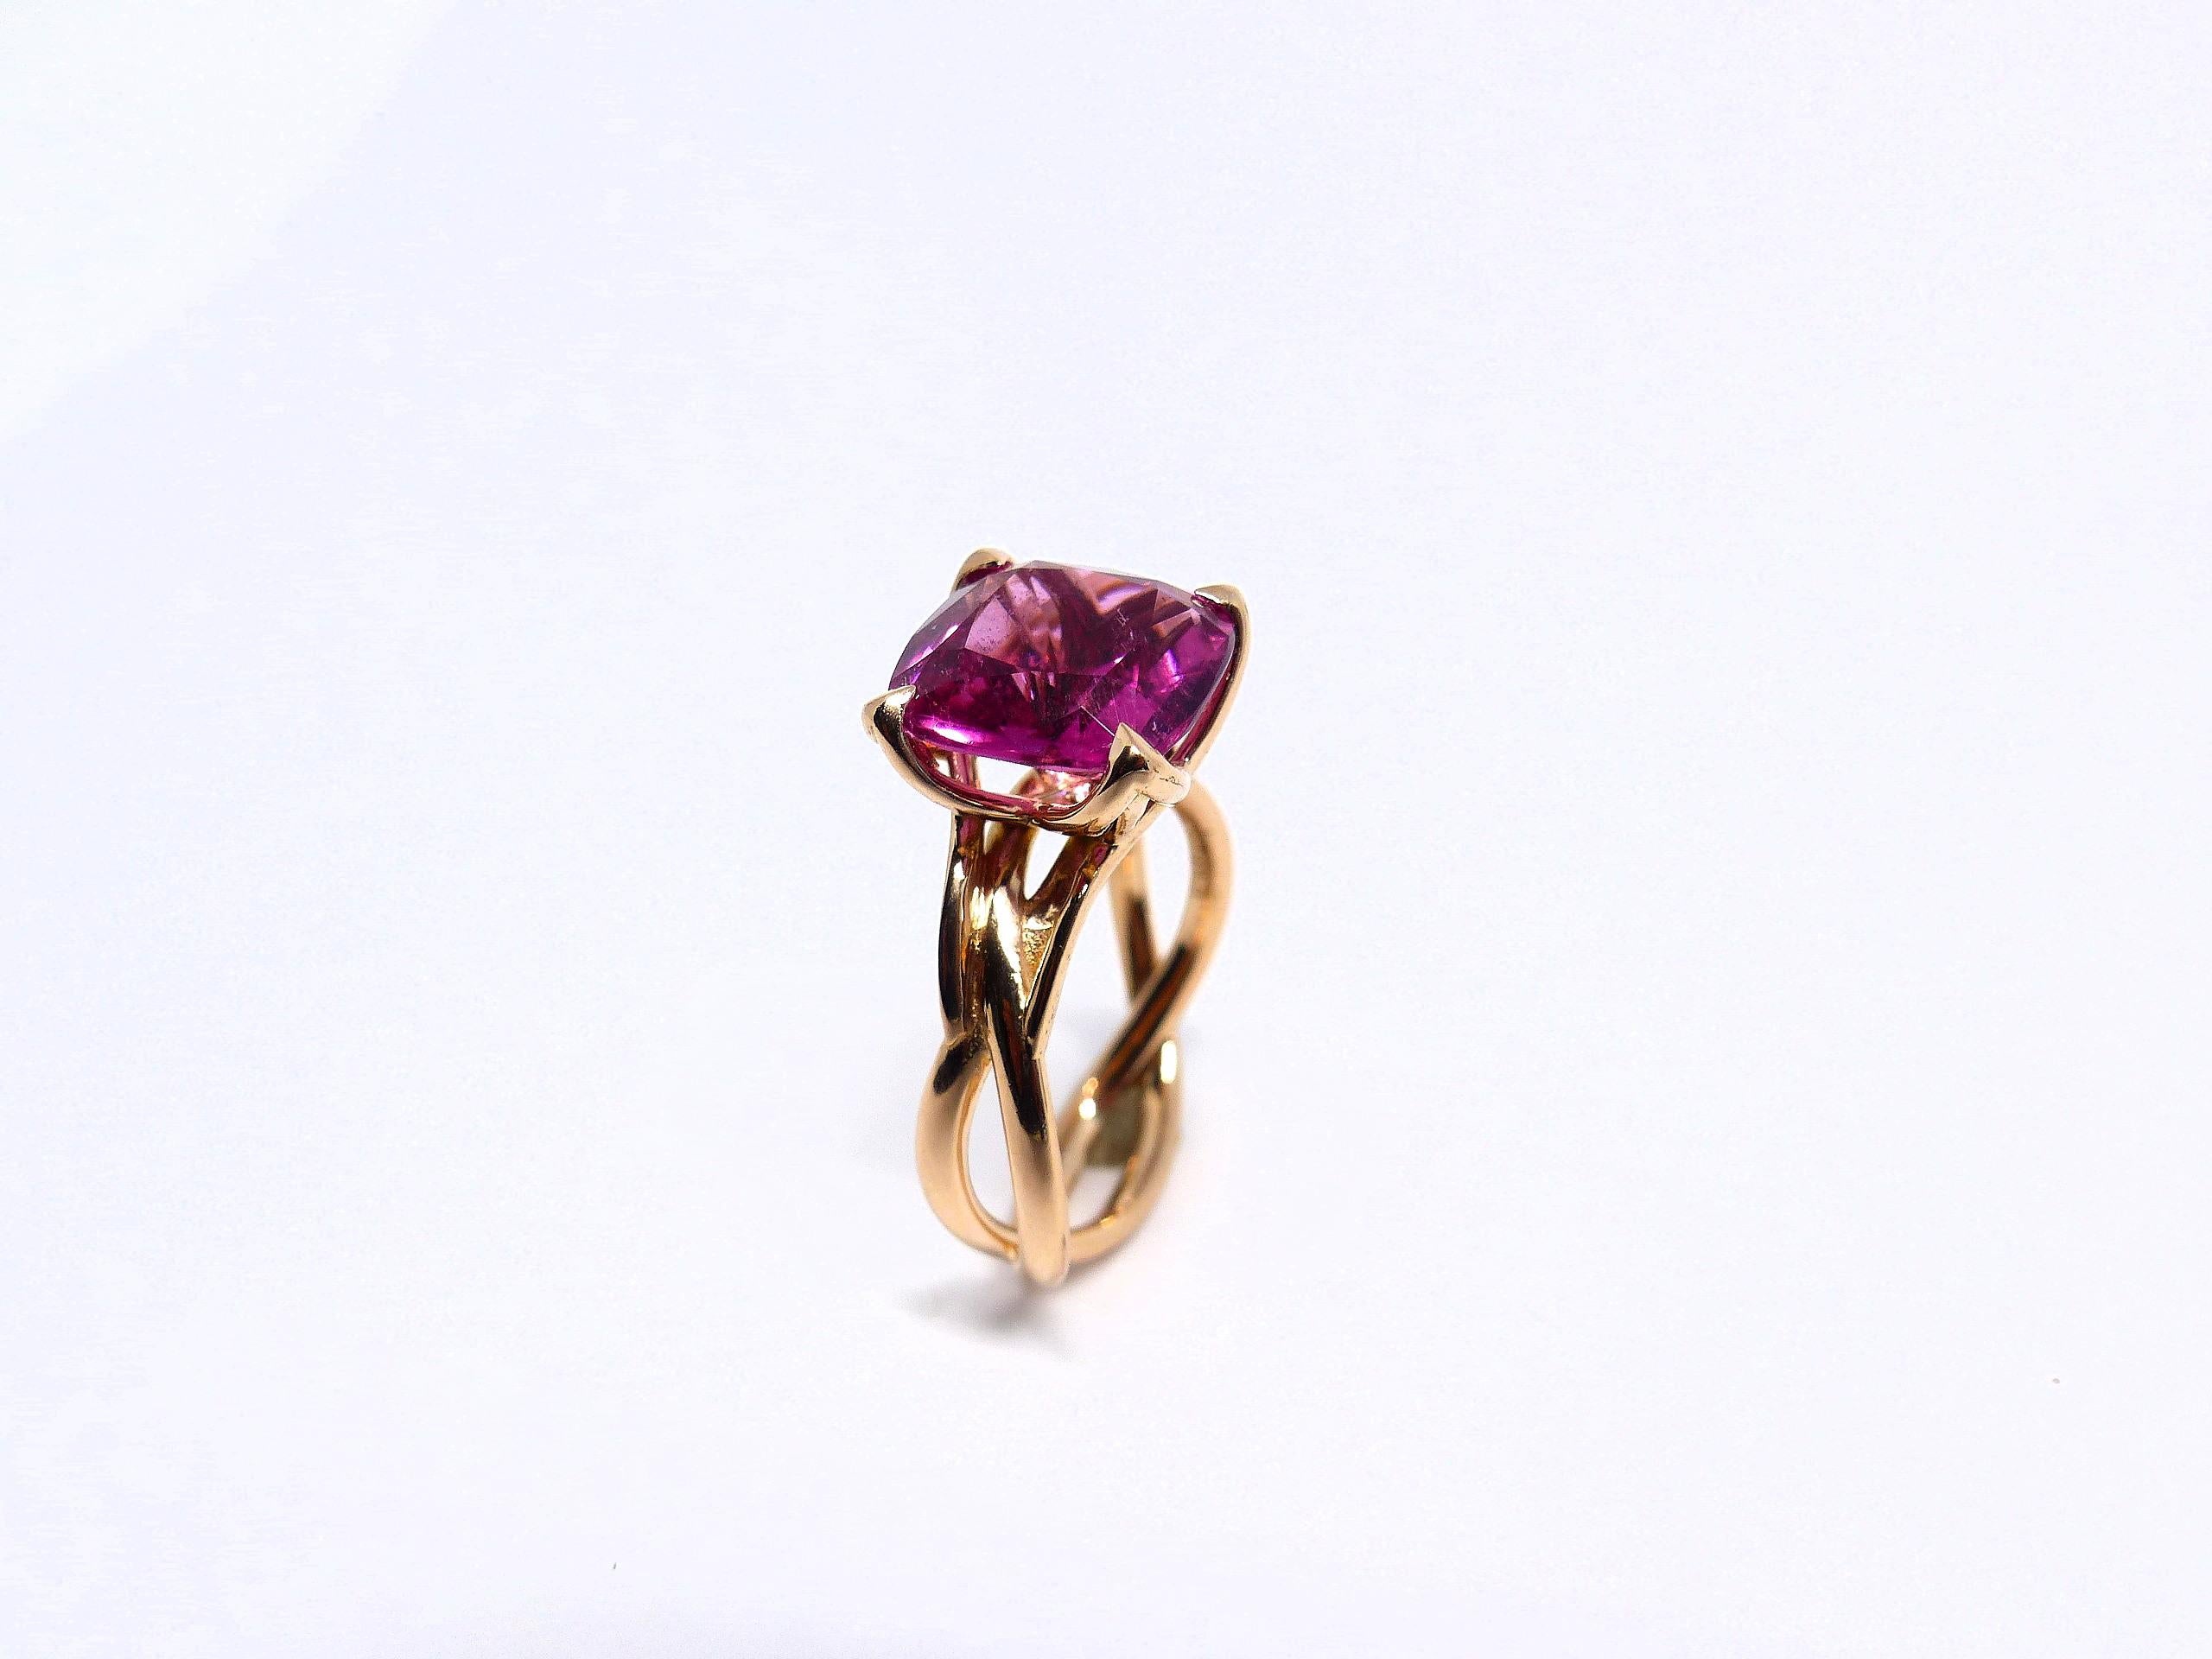 Contemporary Ring in Rose Gold with 1 Rubellite Cushion Shape 11x11mm. For Sale